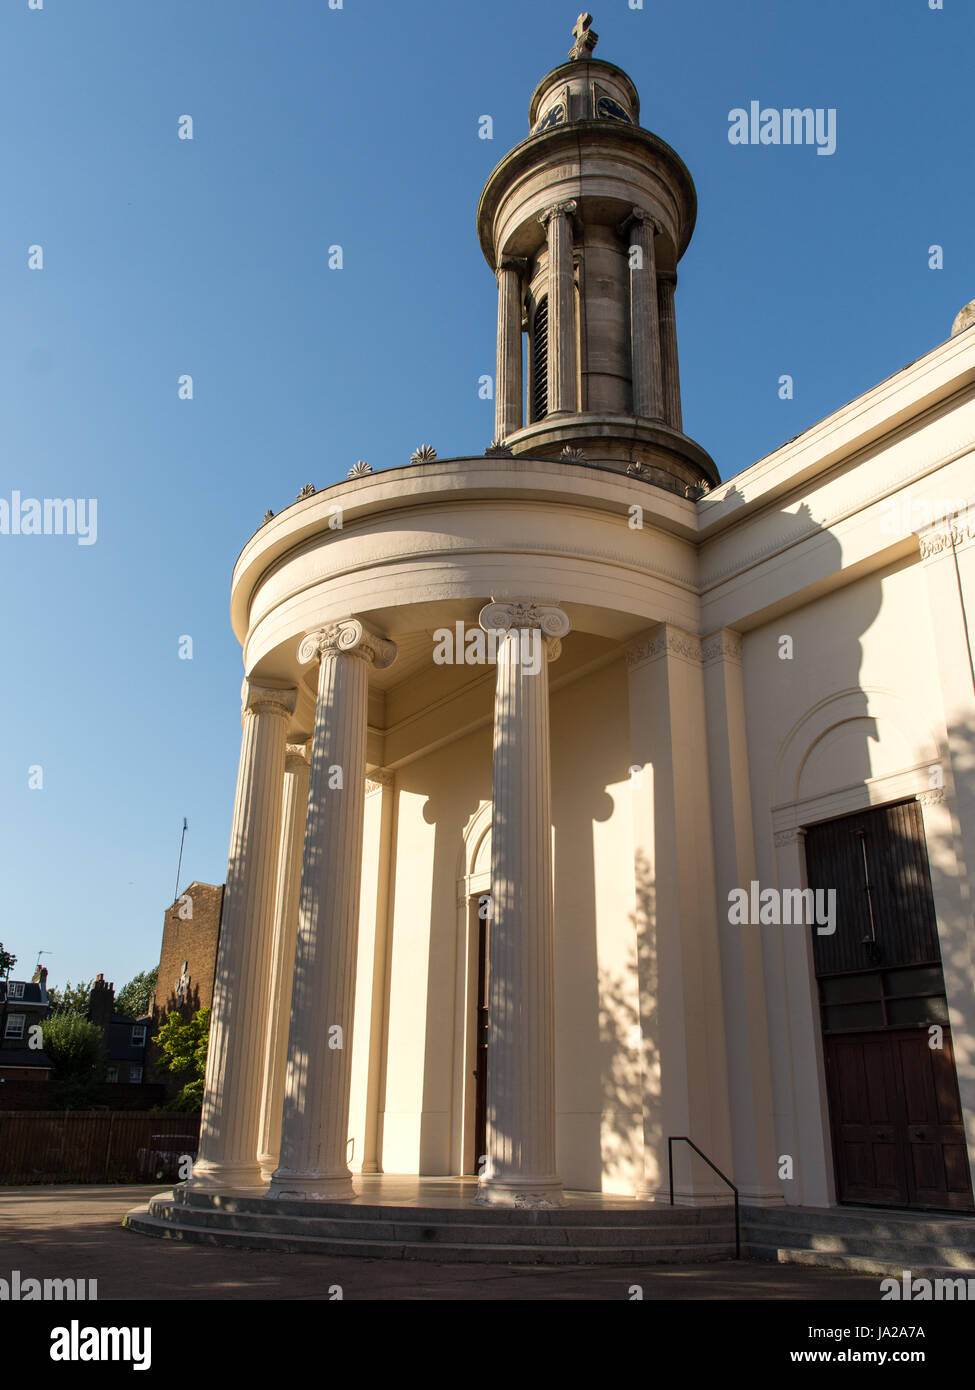 London, England - July 20, 2016: The Greek Orthodox Cathedral Church of All Saints on Camden Street in North London. Stock Photo